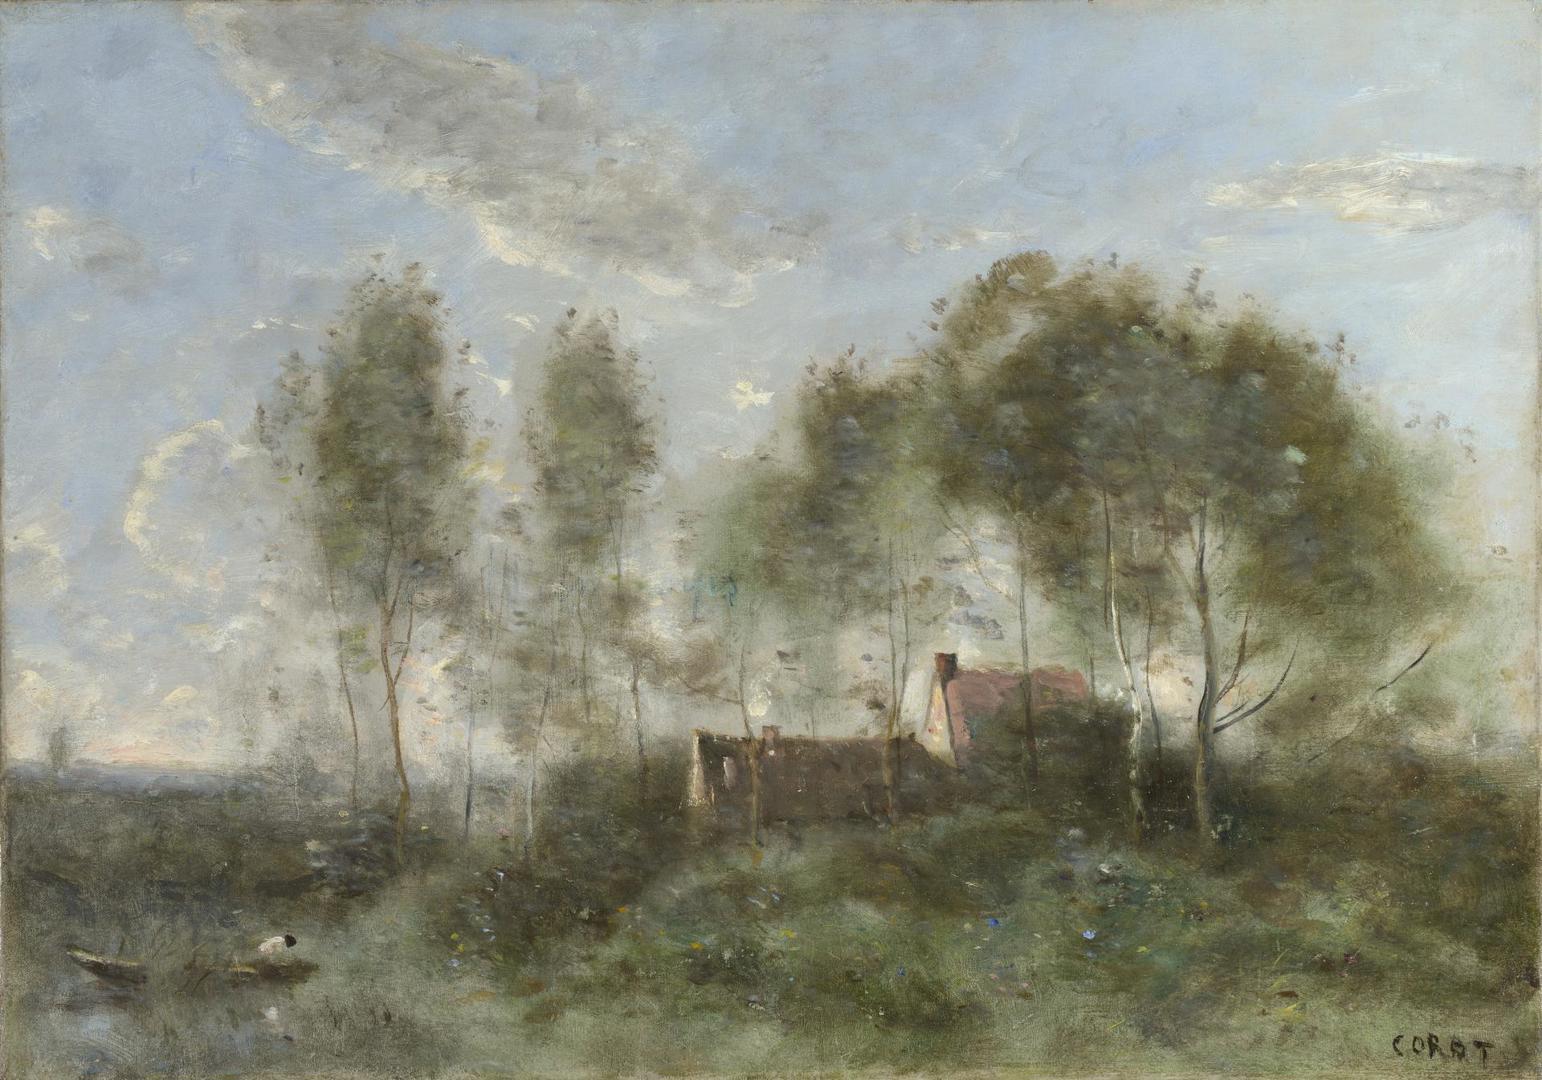 Souvenir of a Journey to Coubron by Jean-Baptiste-Camille Corot